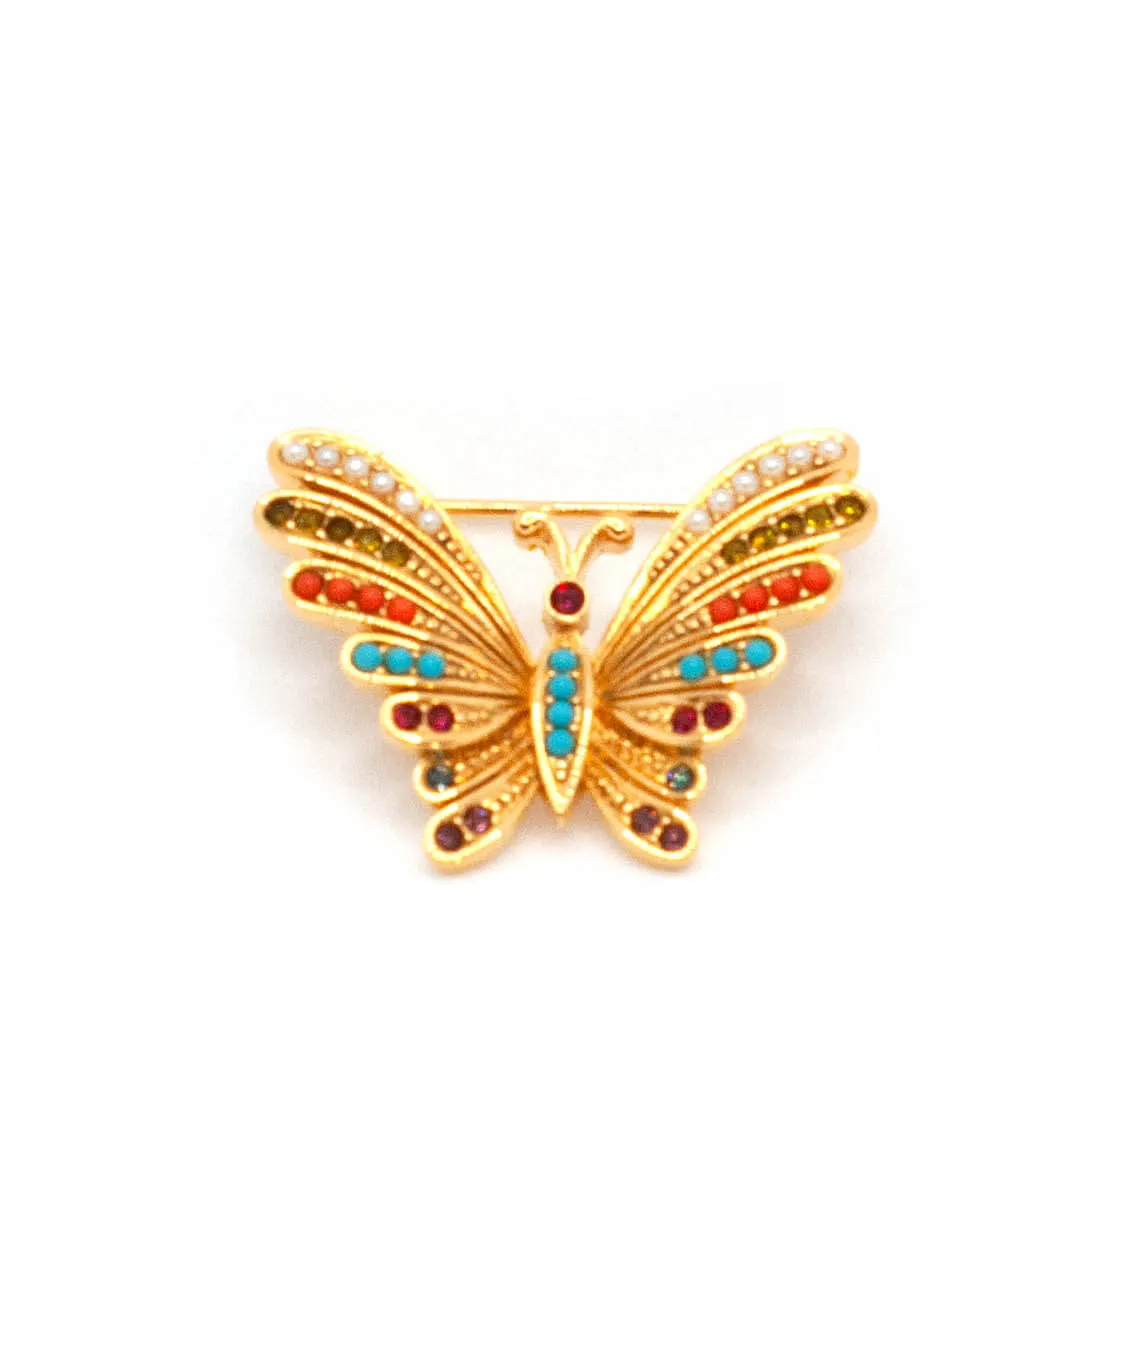 Colourful D'Orlan butterfly brooch pin